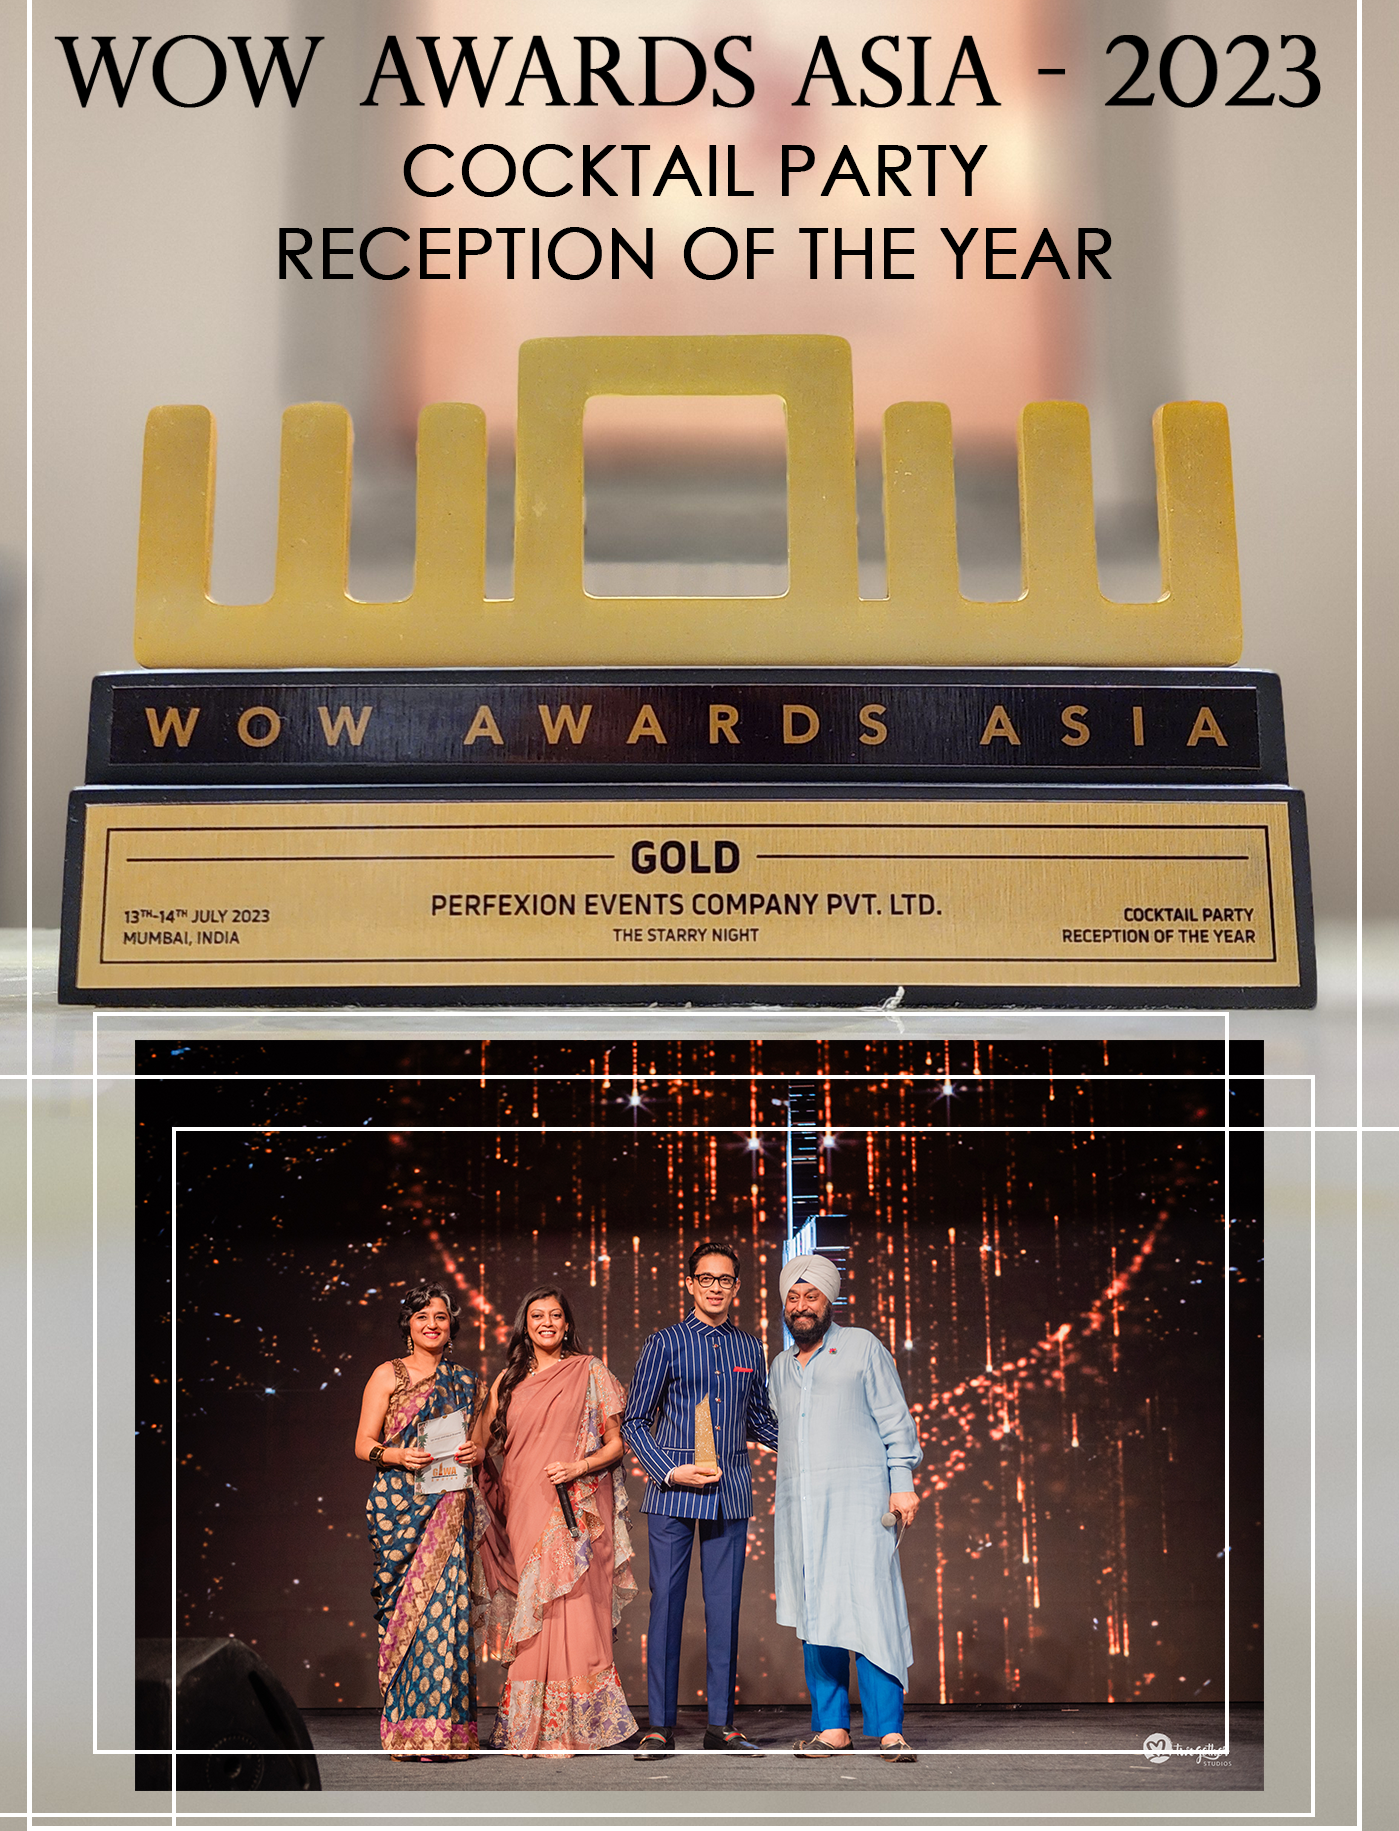 WOW Awards Asia - Cocktail Party Reception of The Year Image